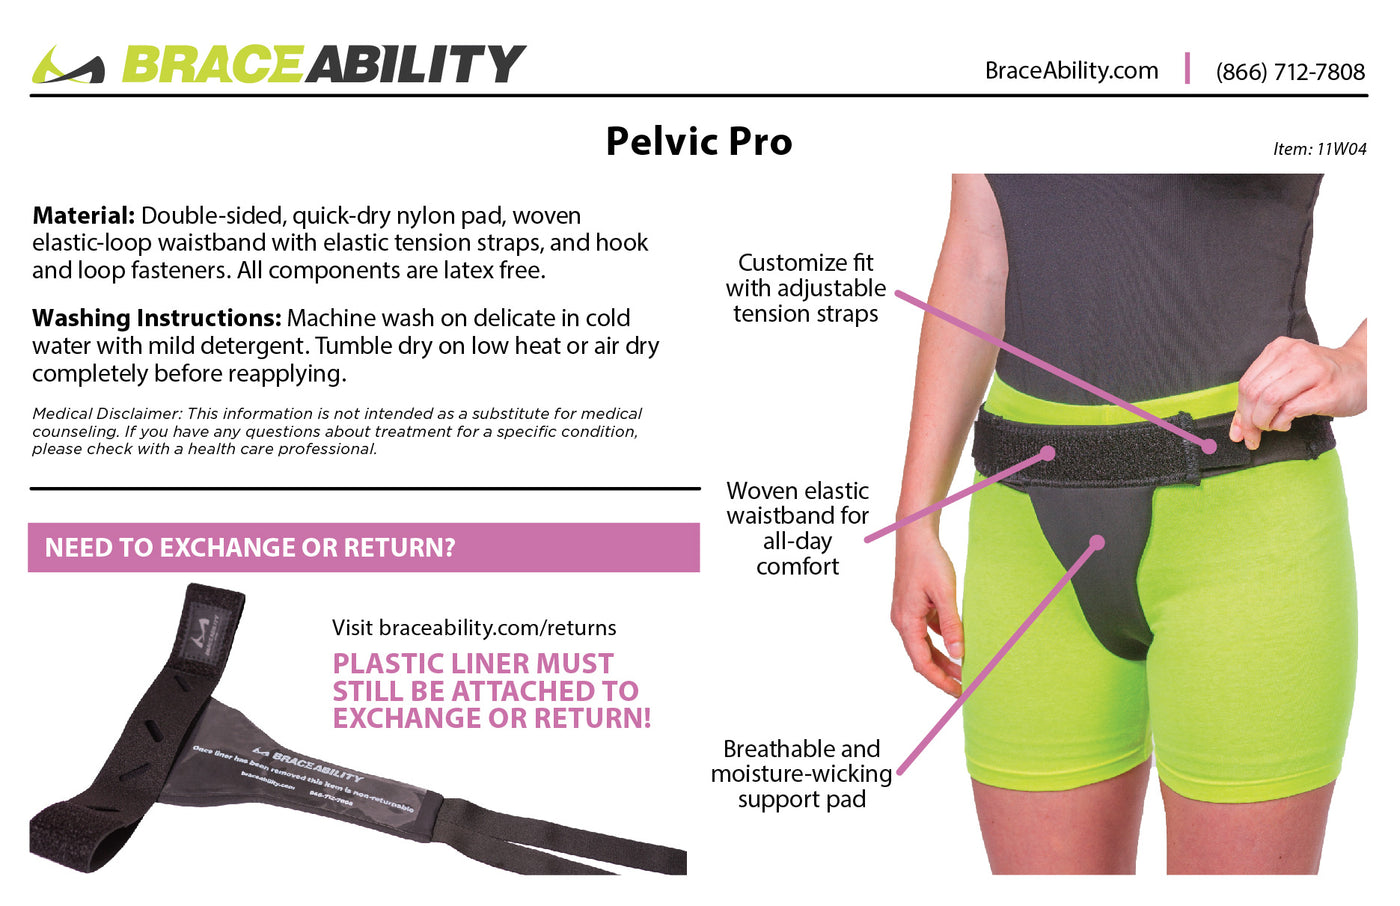 The two types of pelvic support belts trialed in this study. (a